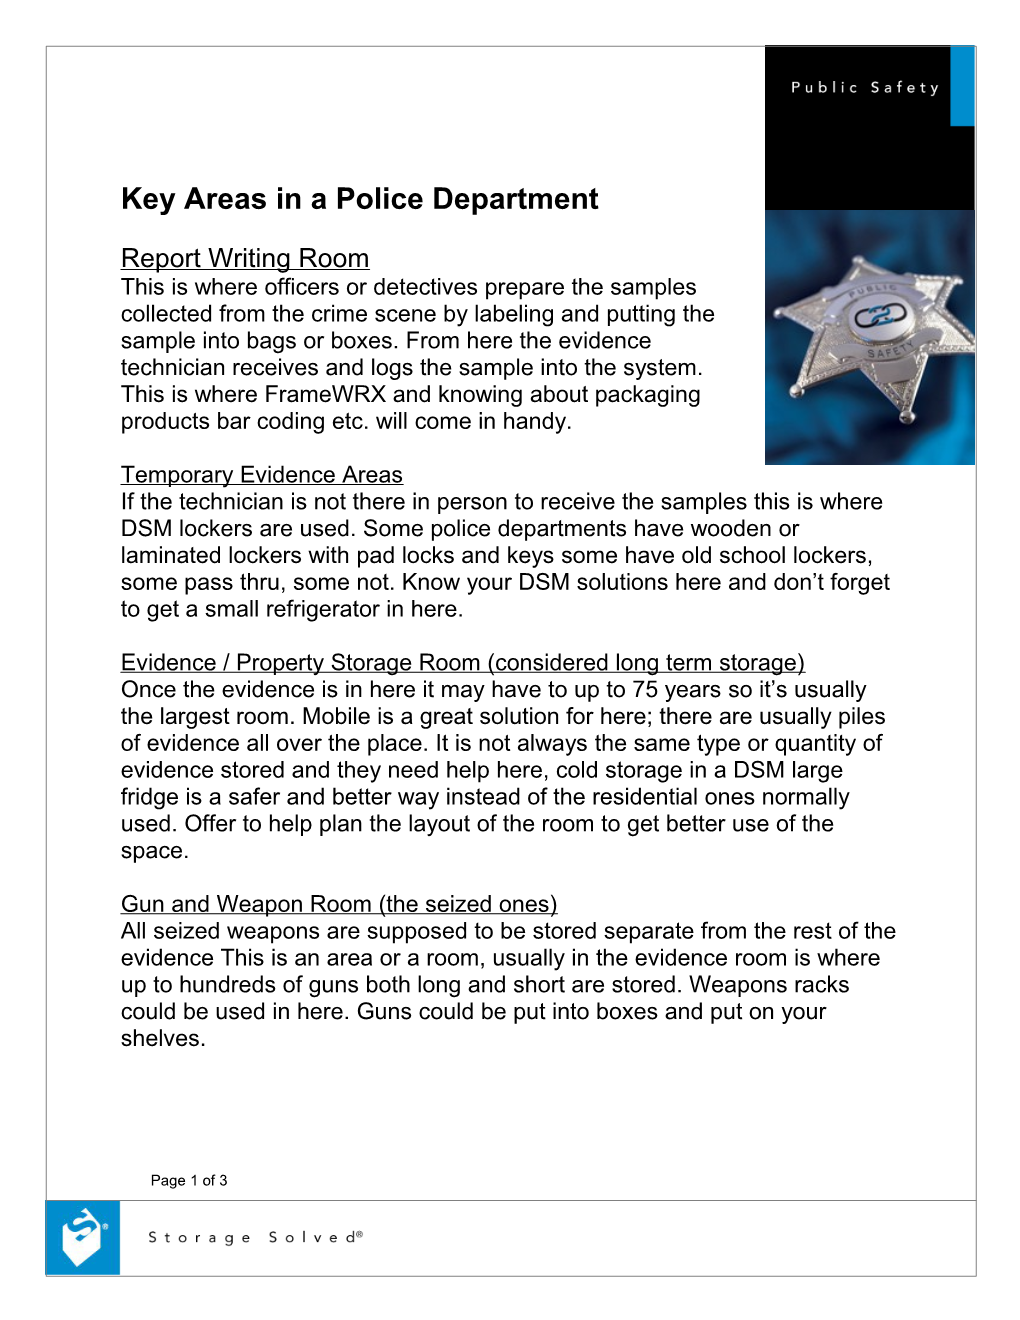 Key Areas in a Police Department